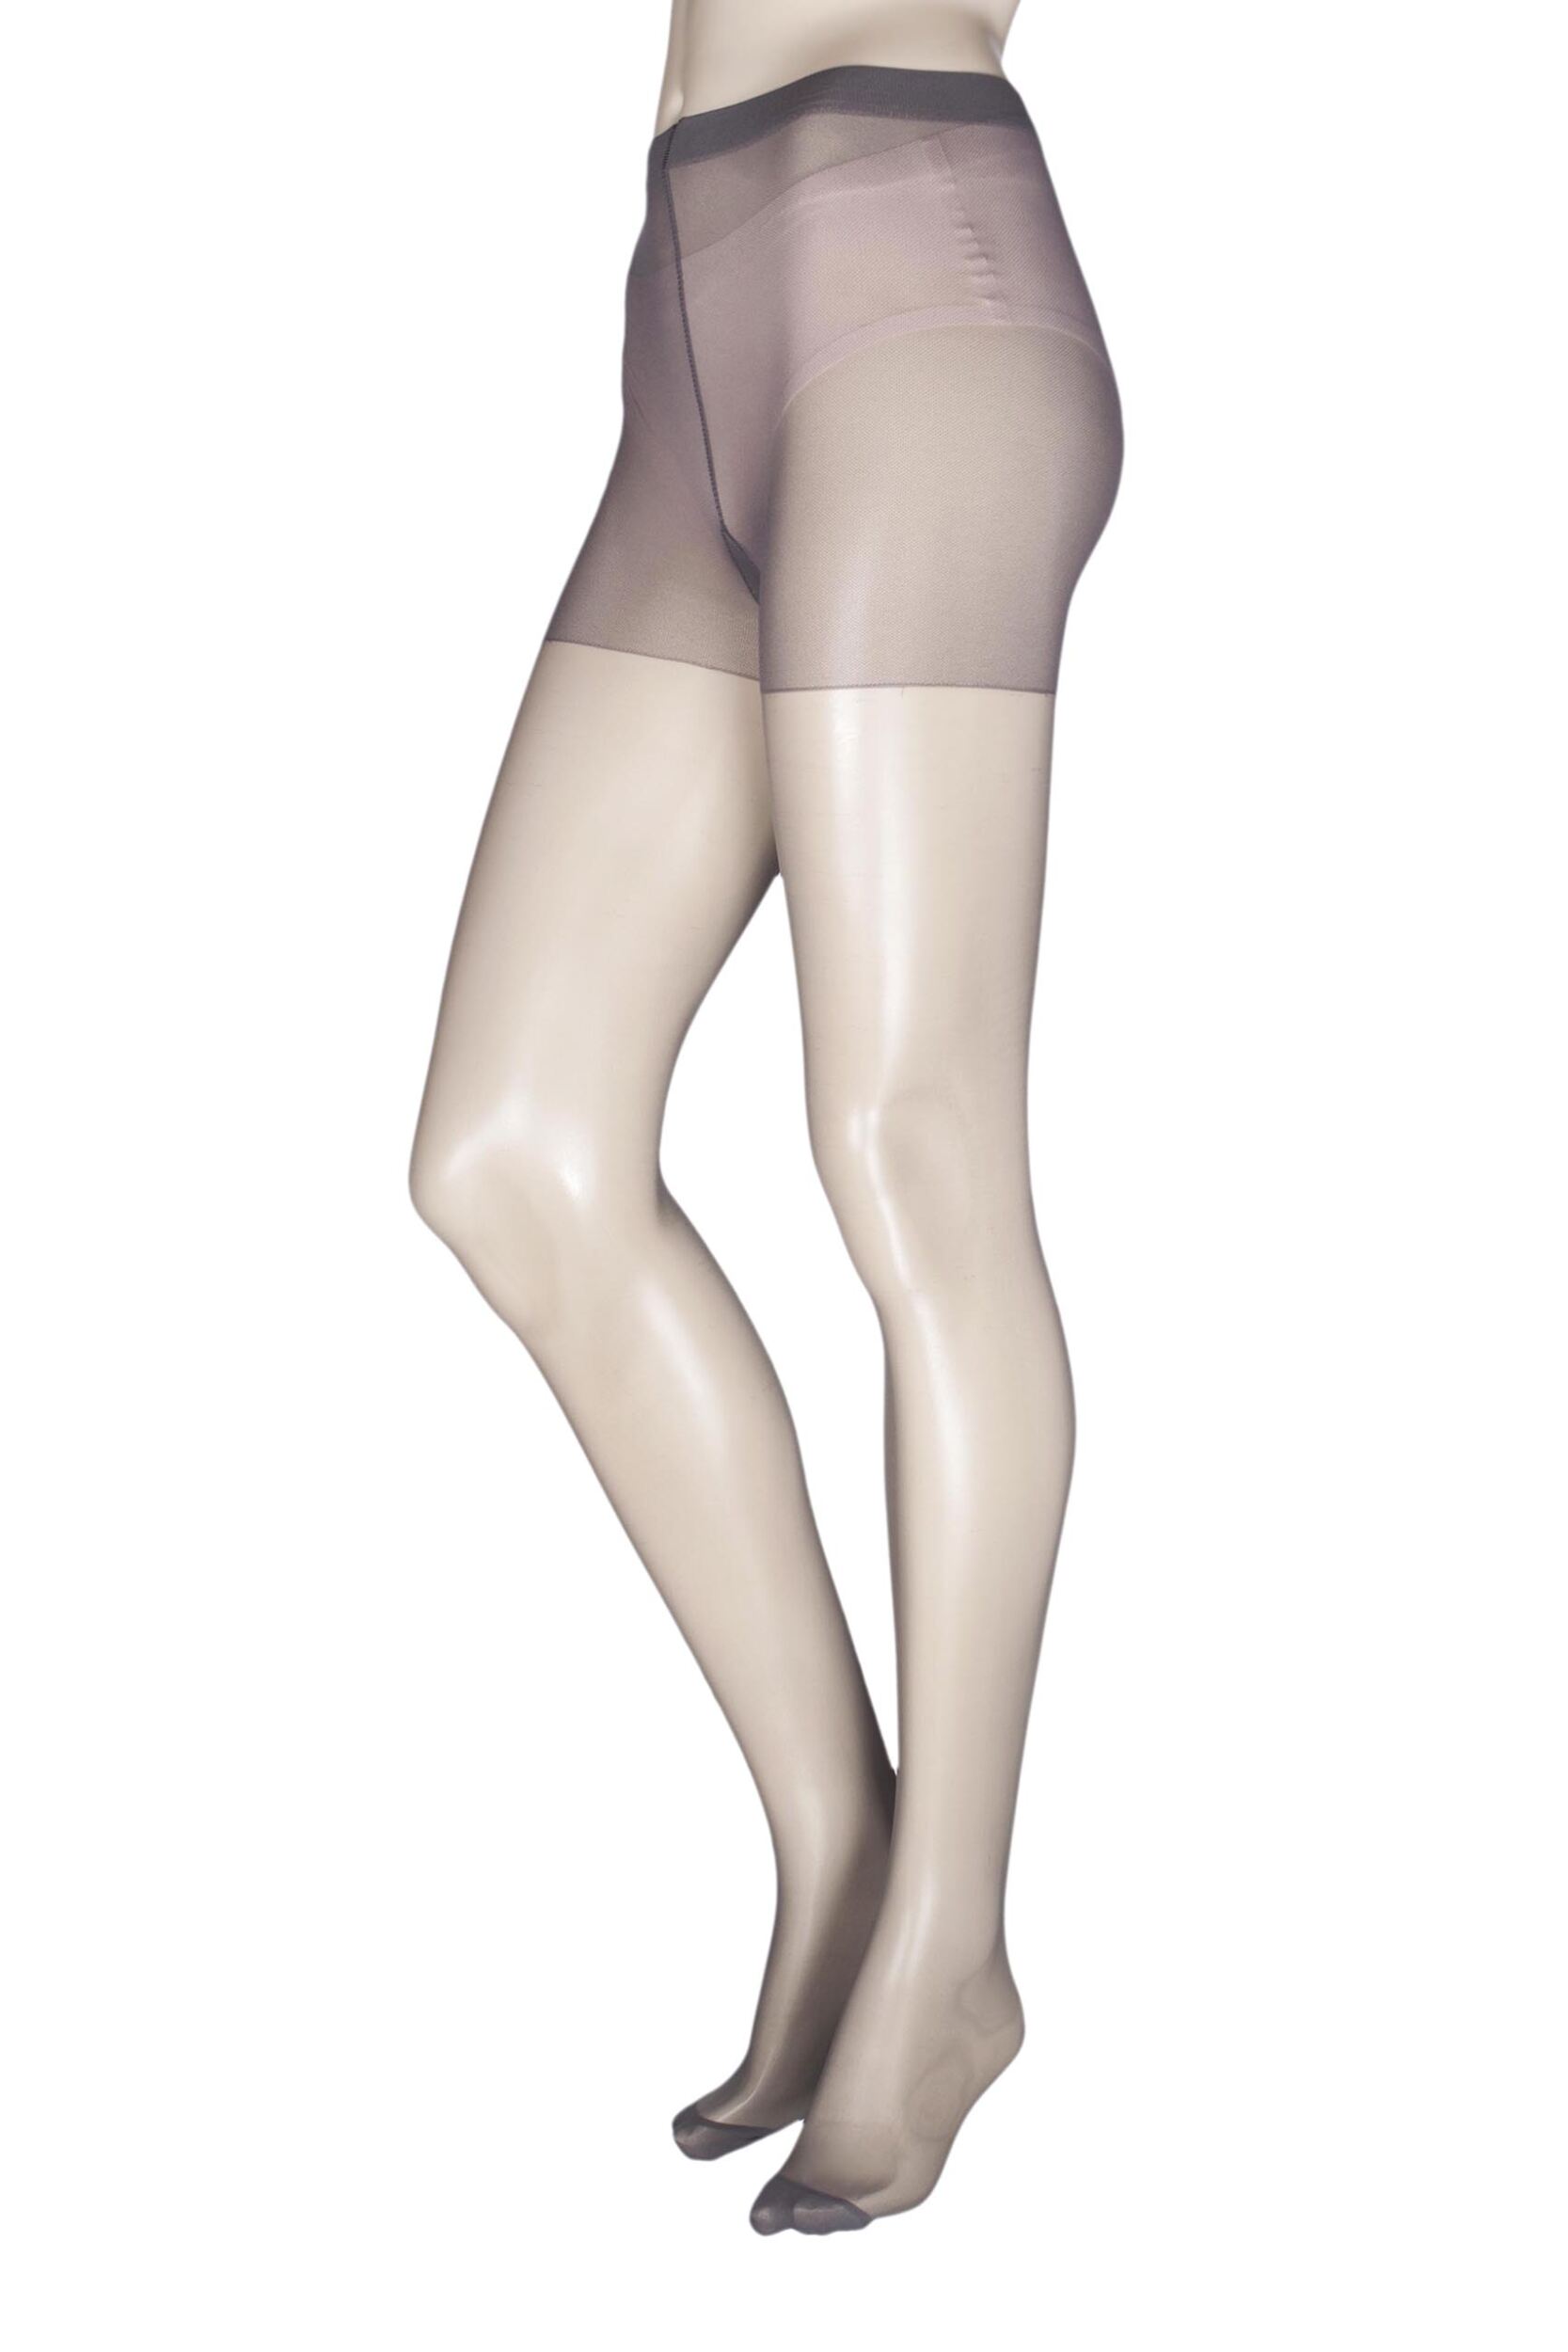 1 Pair Anthracite Class Tights Ladies Extra Tall - Levante